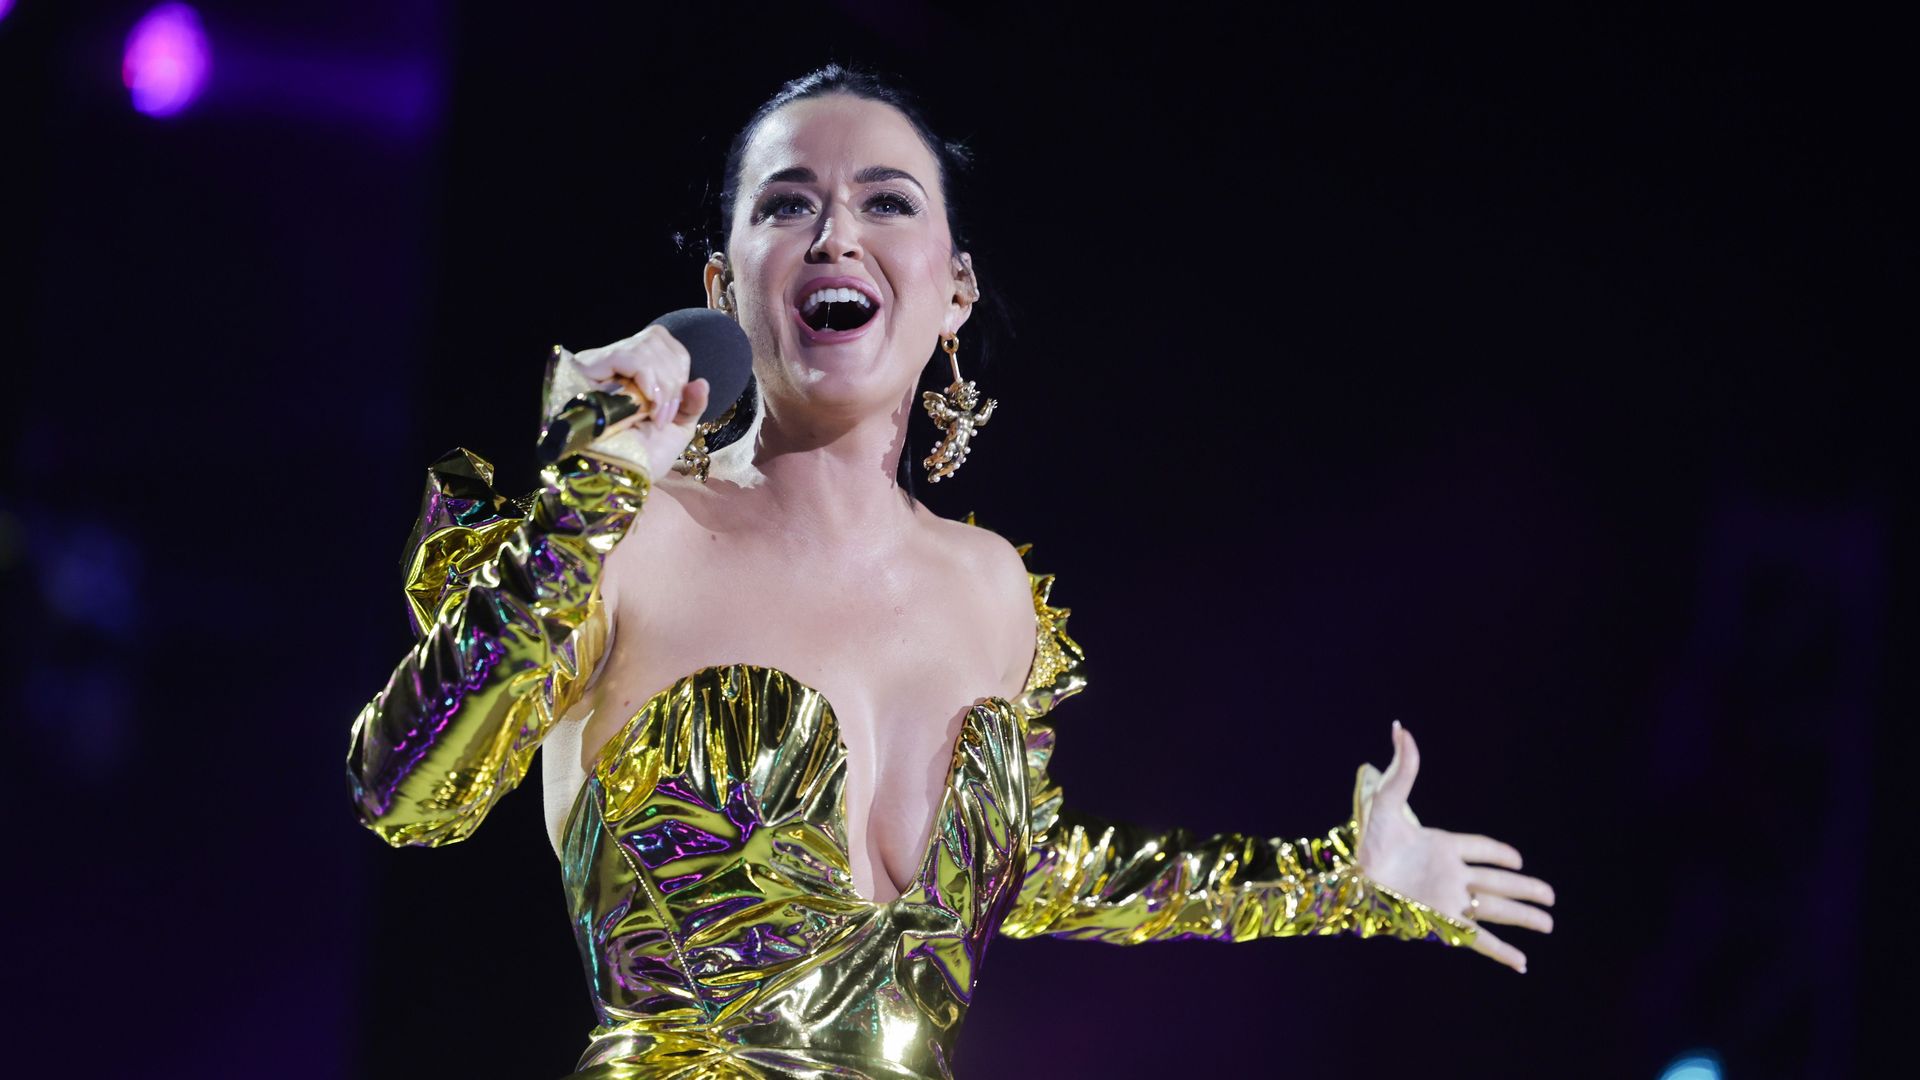 Katy Perry gold dress sings on stage